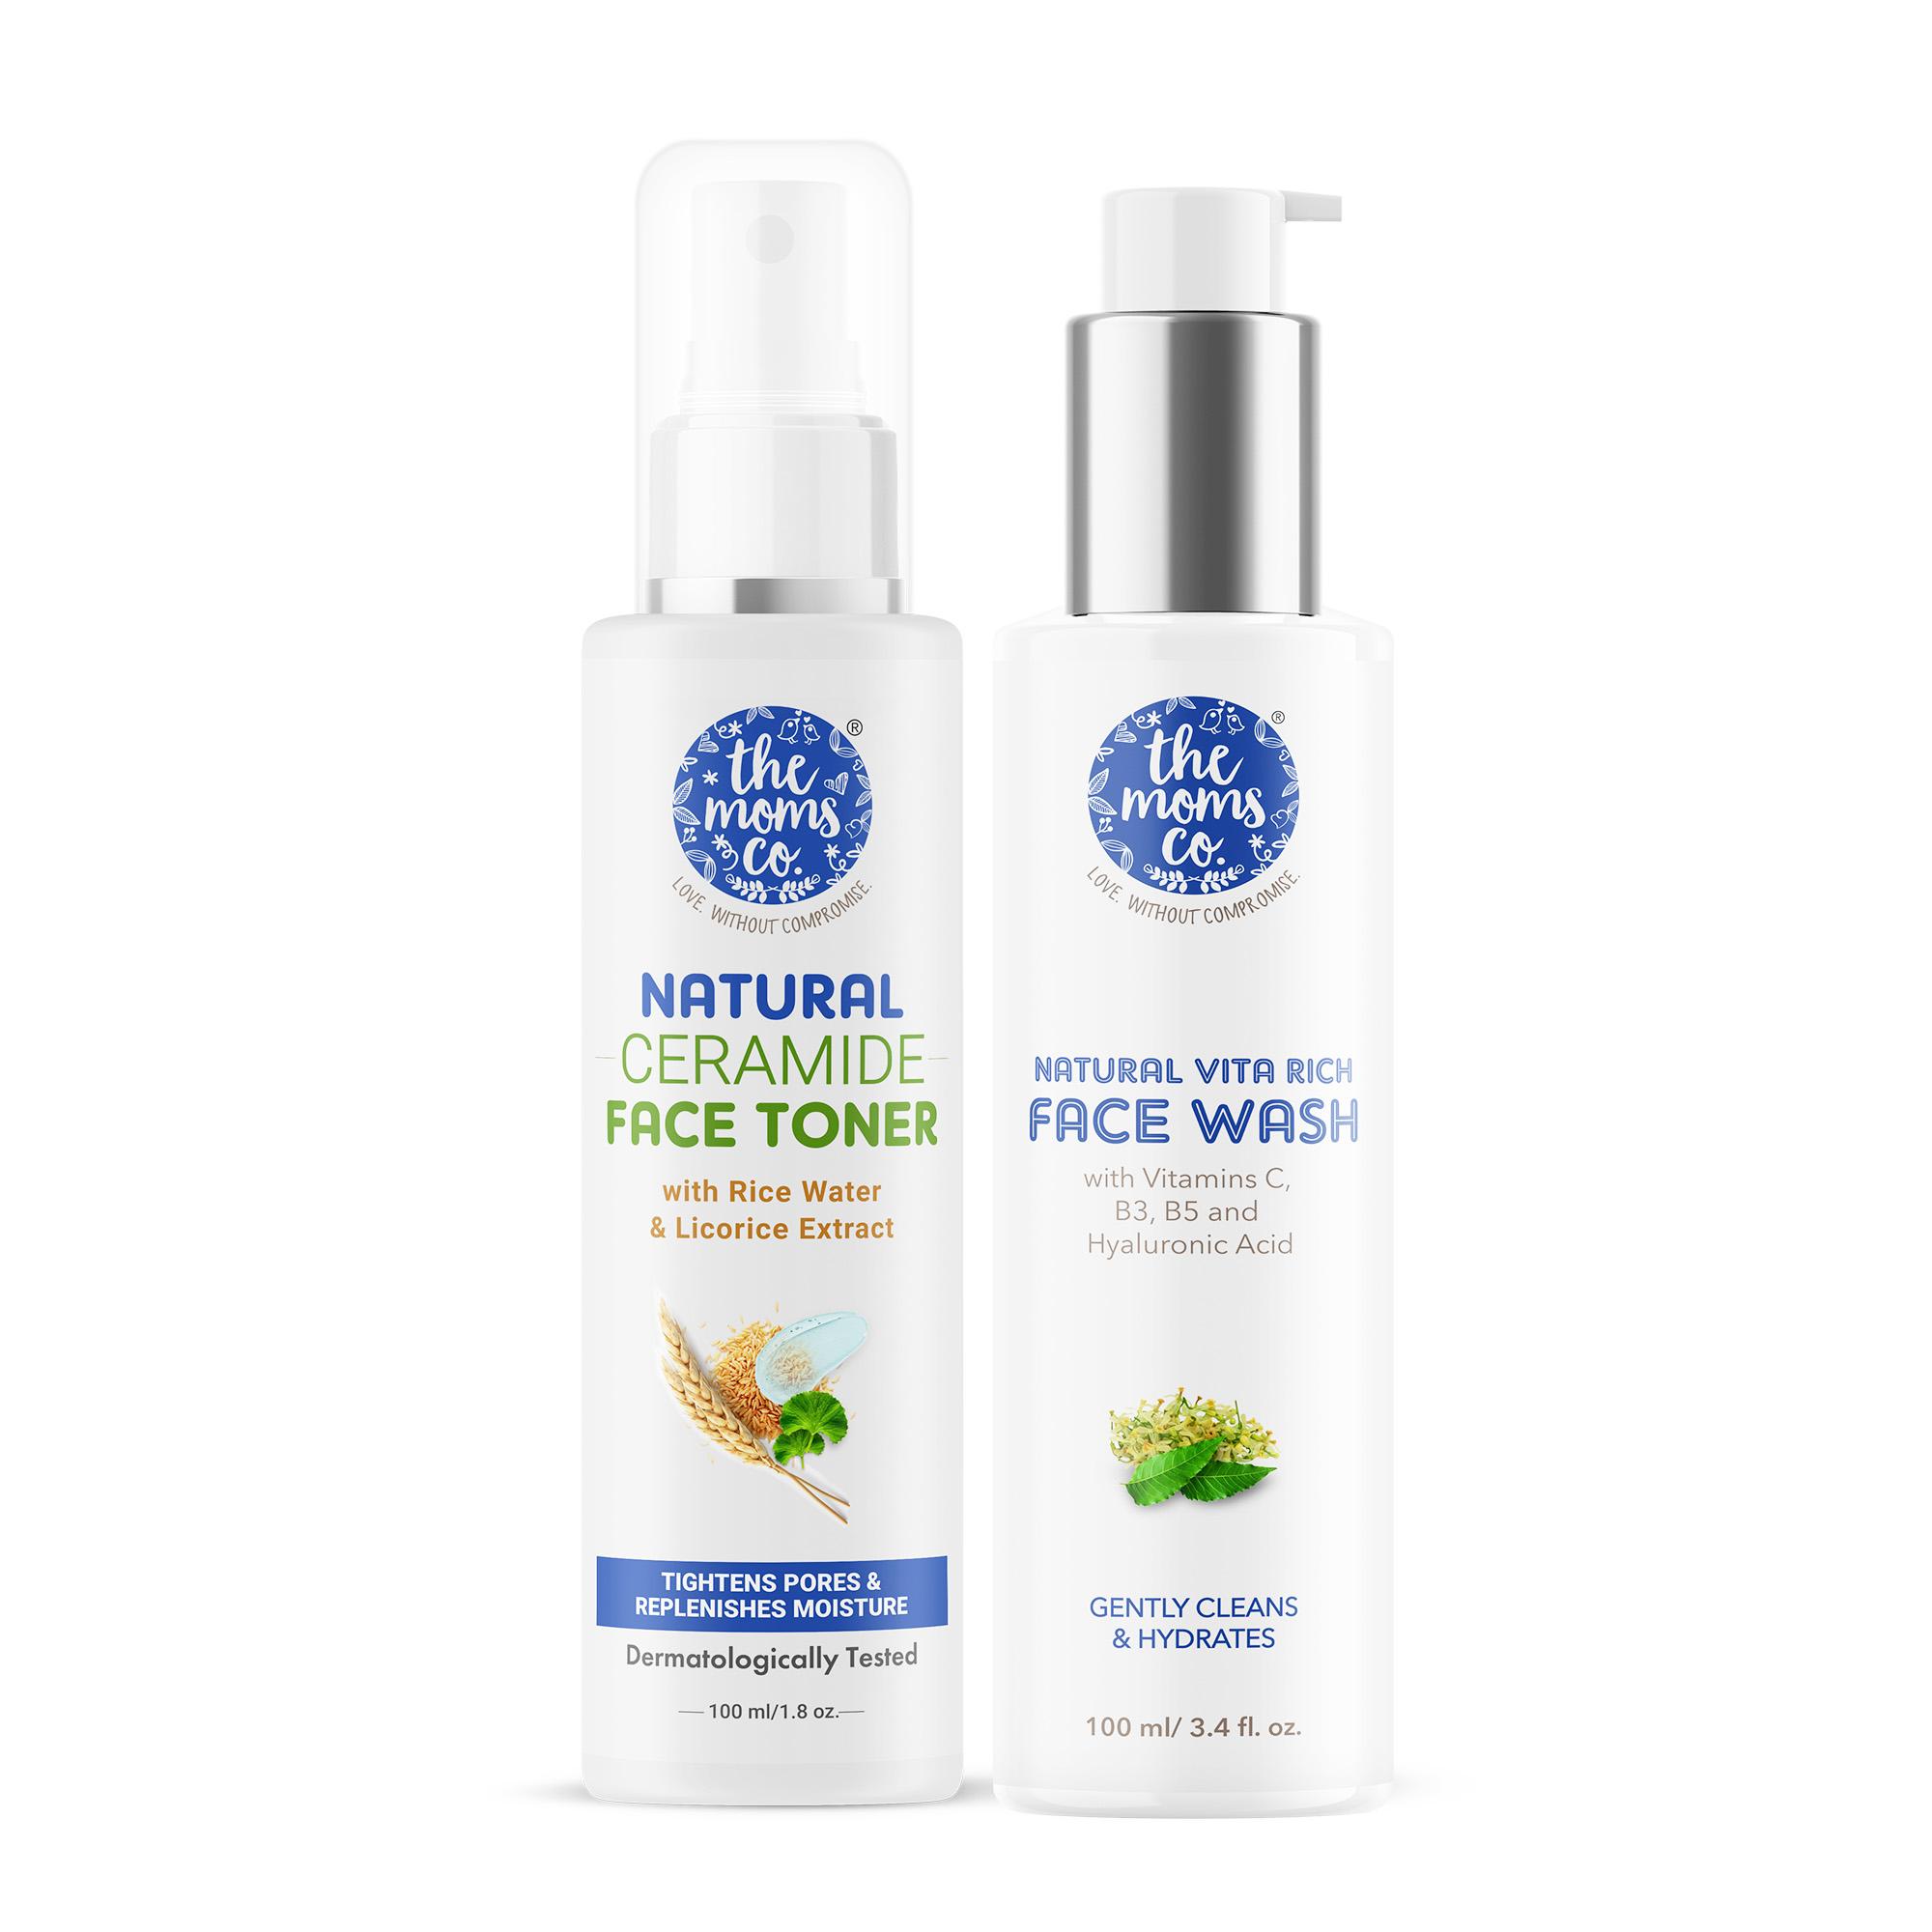 The Mom's Co. | The Mom's Co. Natural Ceramide Face Toner & Natural Vita Rich Face Wash Combo